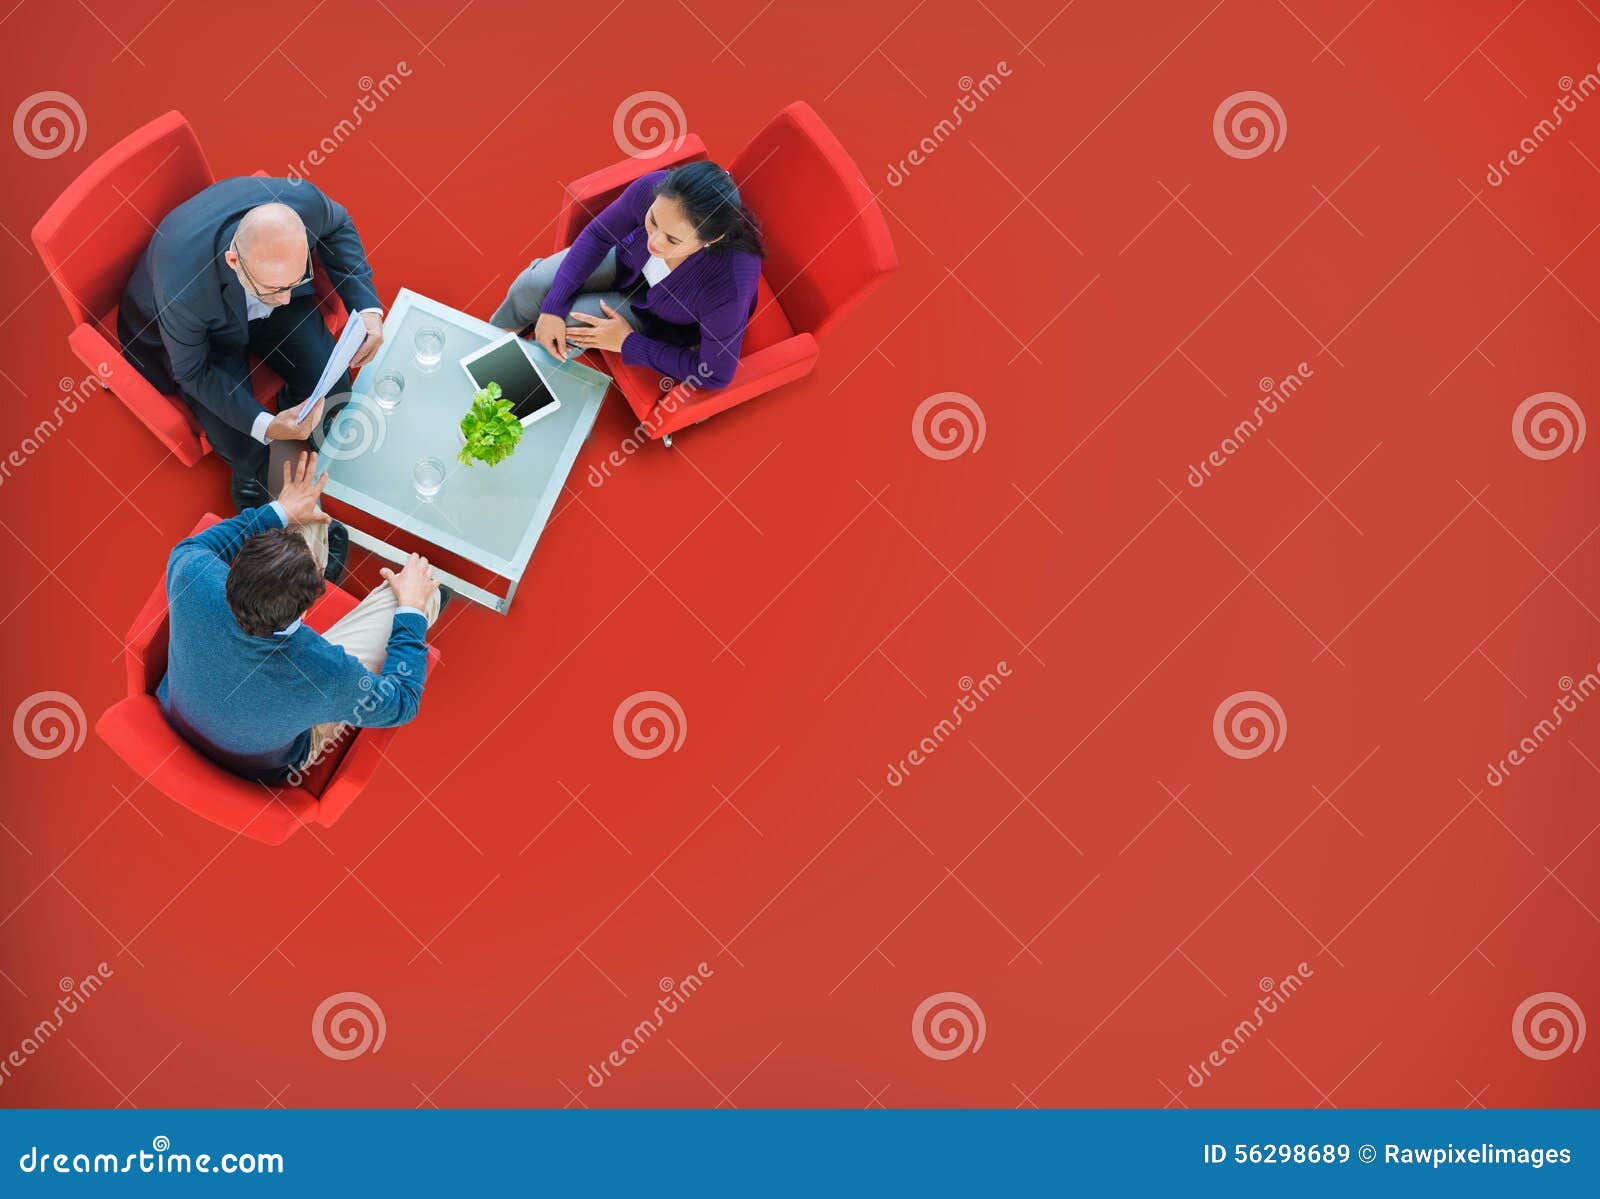 business team discussion meeting planning concept